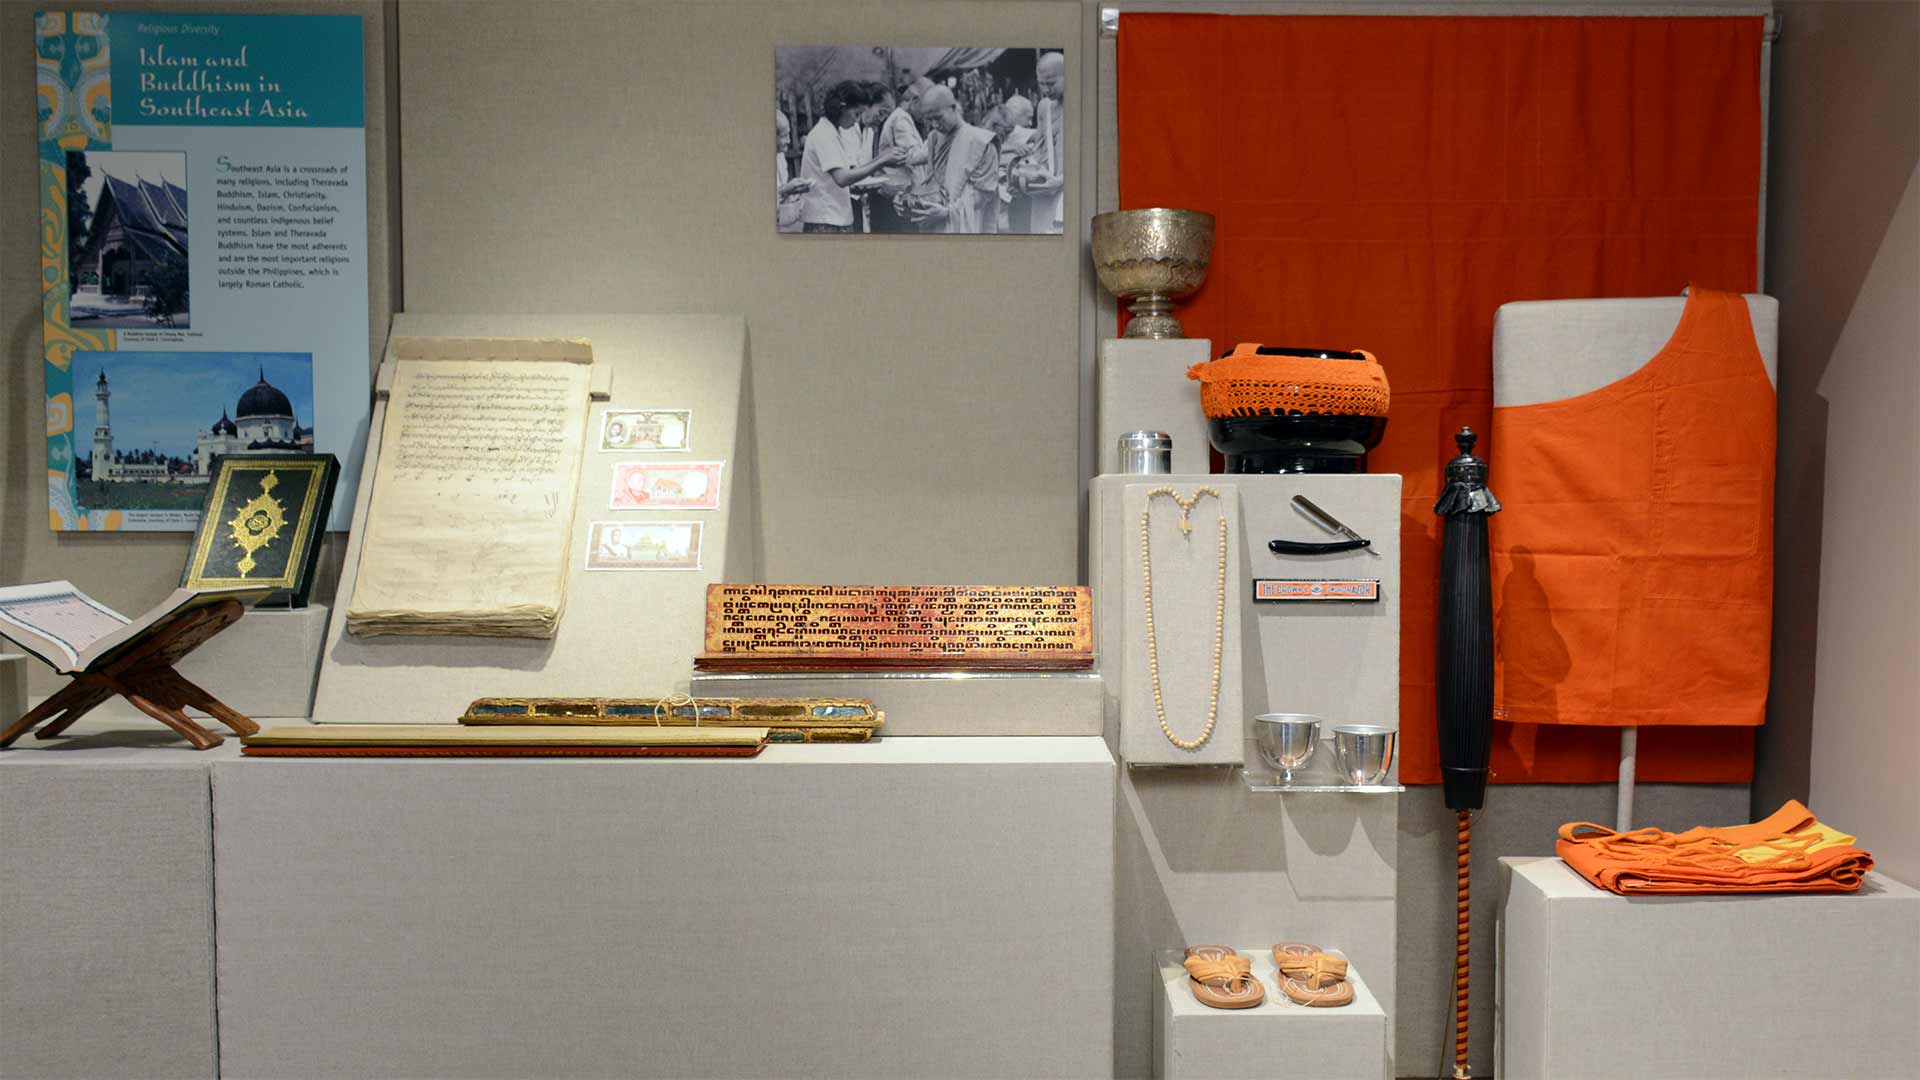 Buddhist objects on display at the Museum